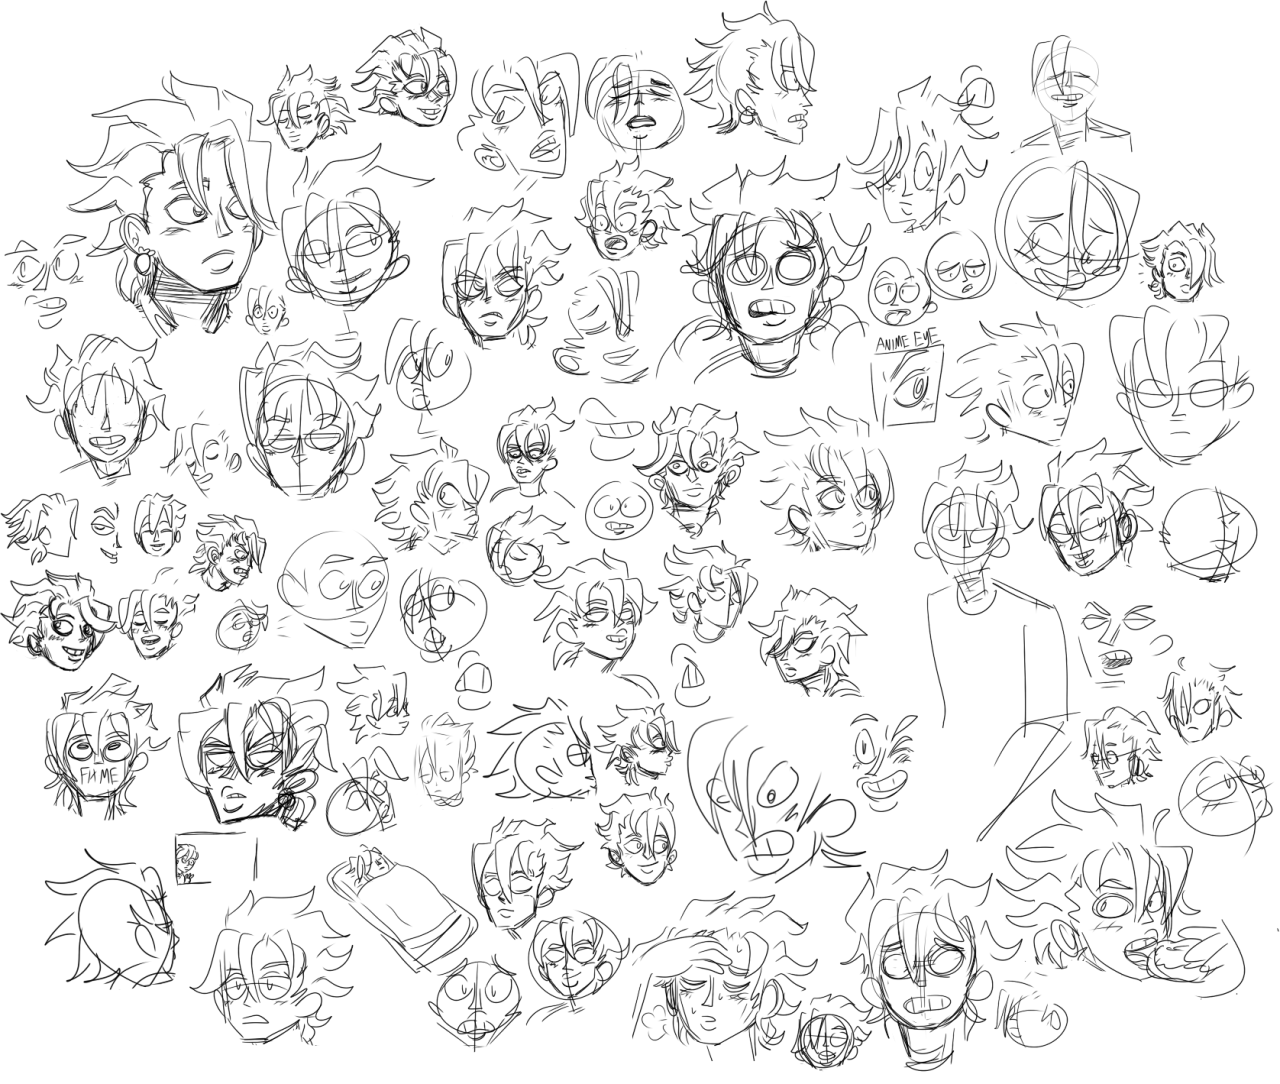 Here’s a collection of some of my favorite heads, faces, lips and eyes of fugo